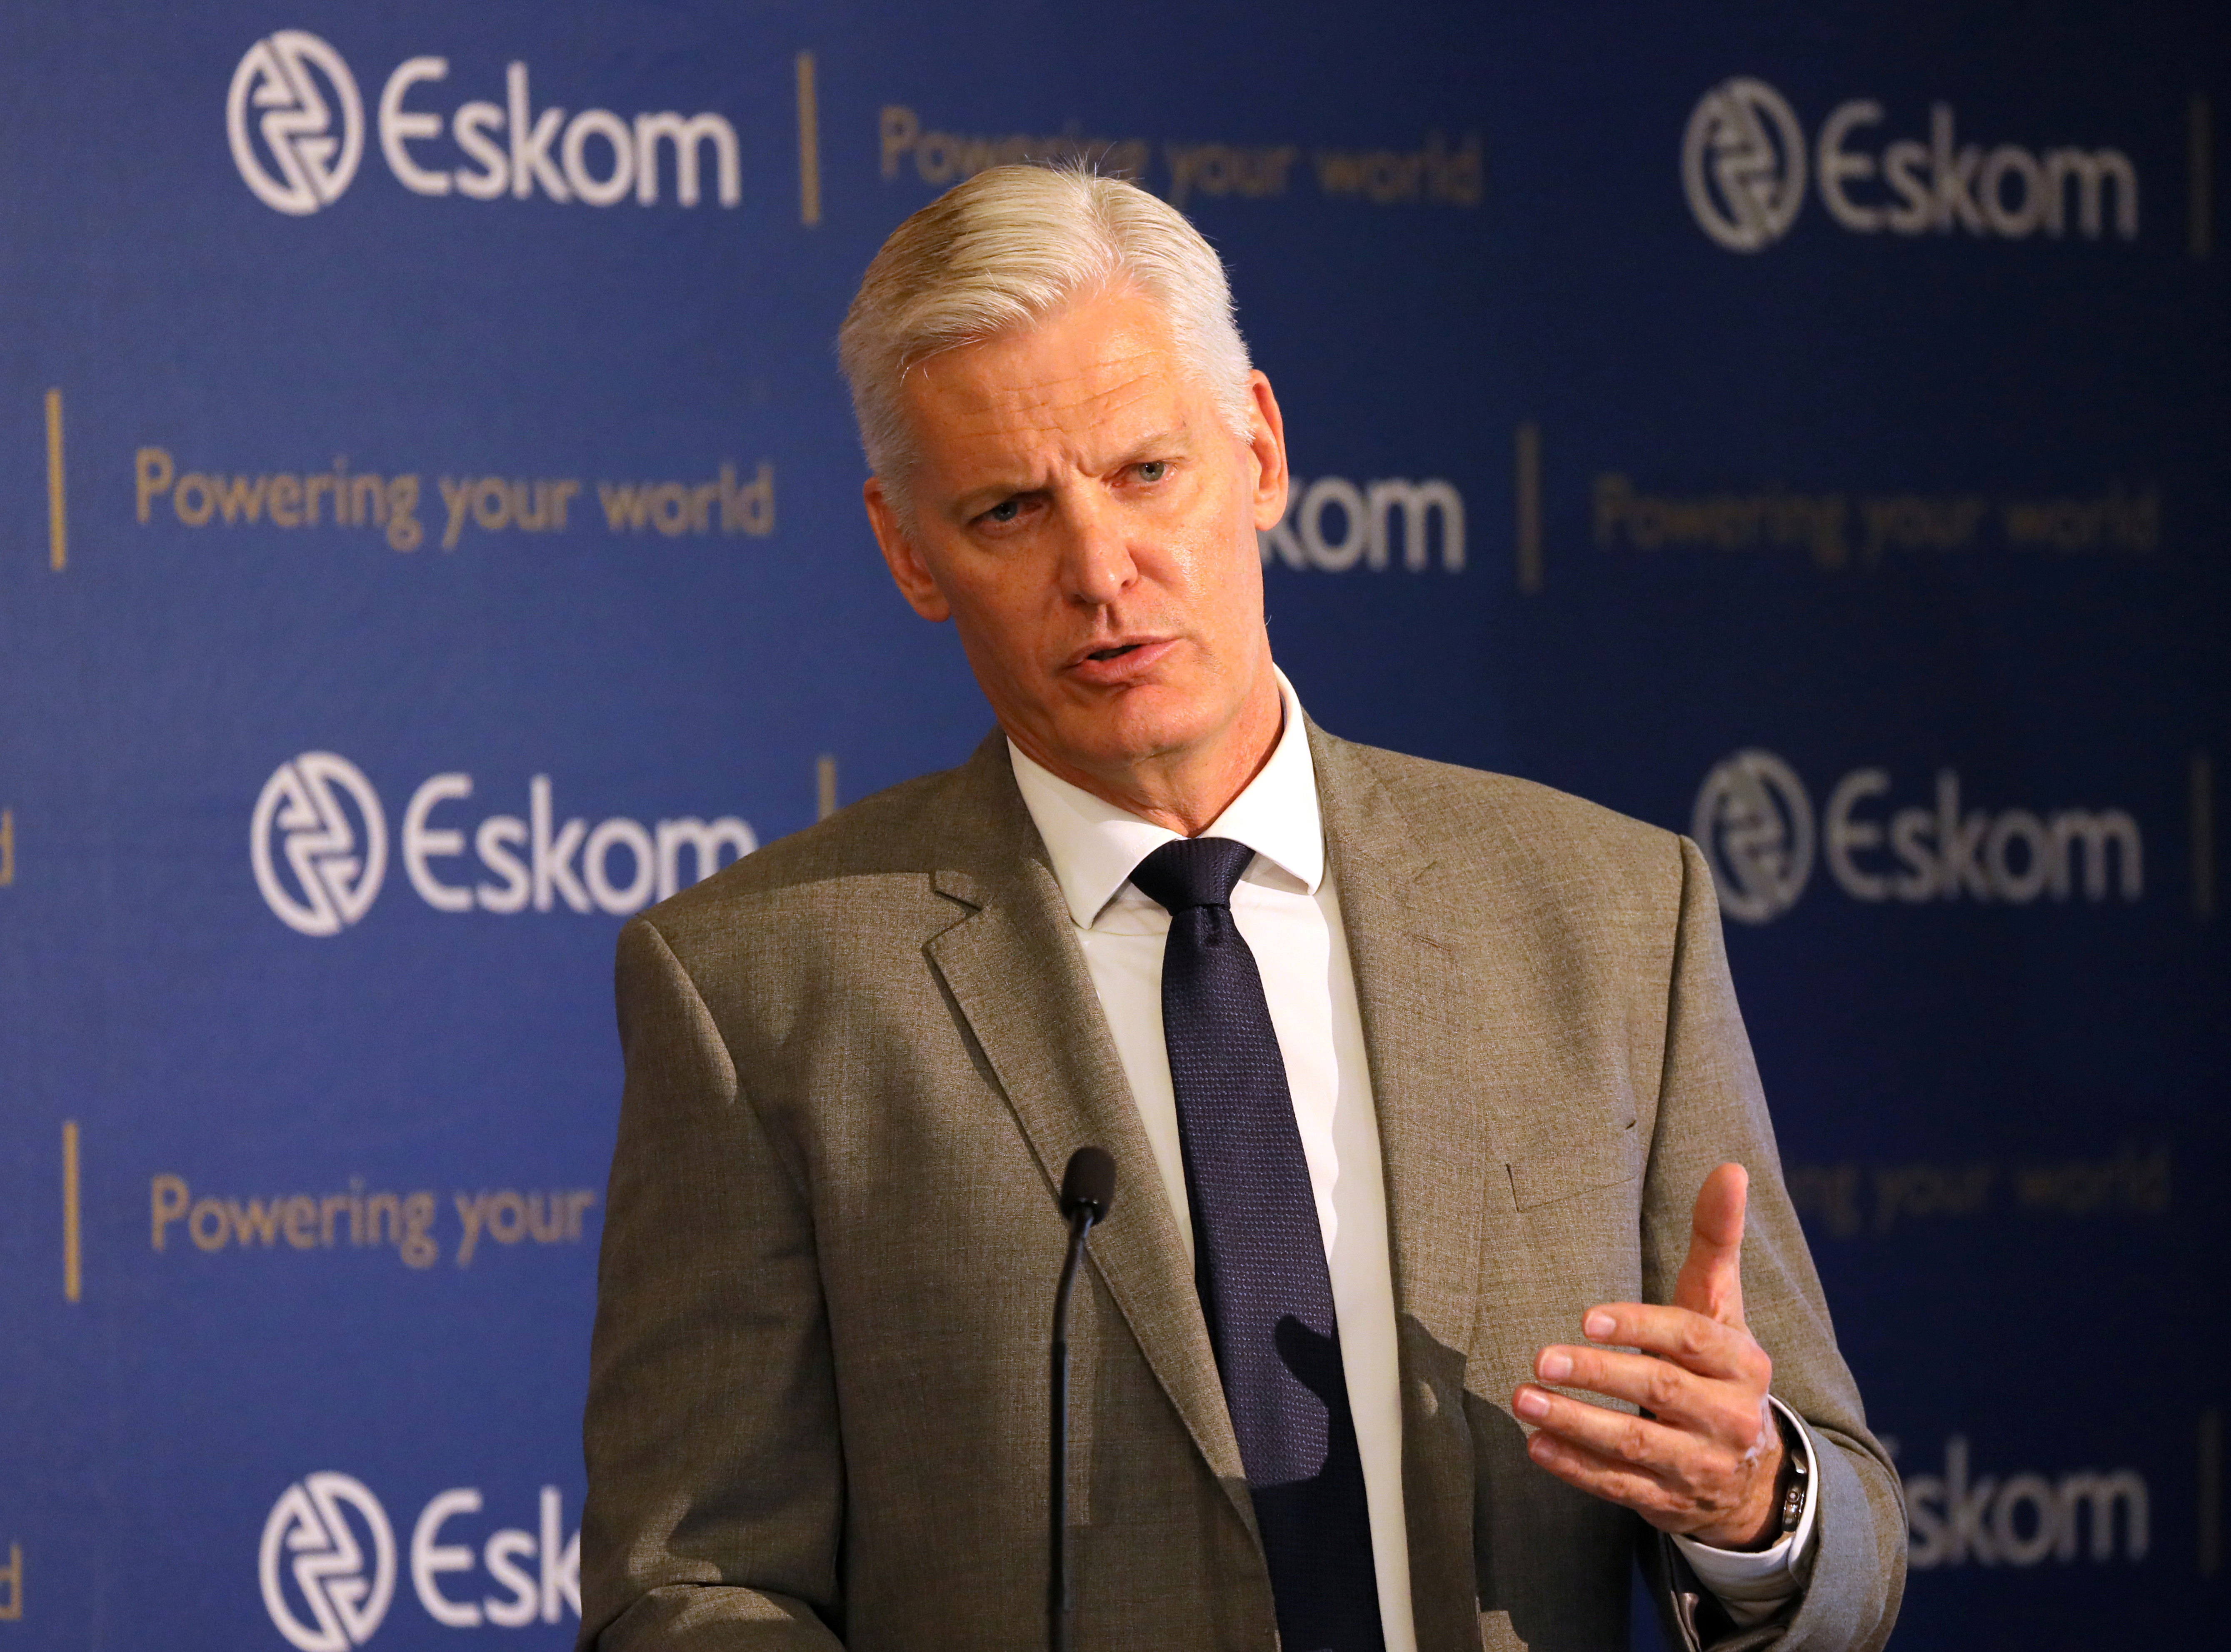 Andre de Ruyter, chief executive of state-owned power utility Eskom, speaks during a media briefing in Johannesburg, South Africa, Jan. 31, 2020. REUTERS/Sumaya Hisham